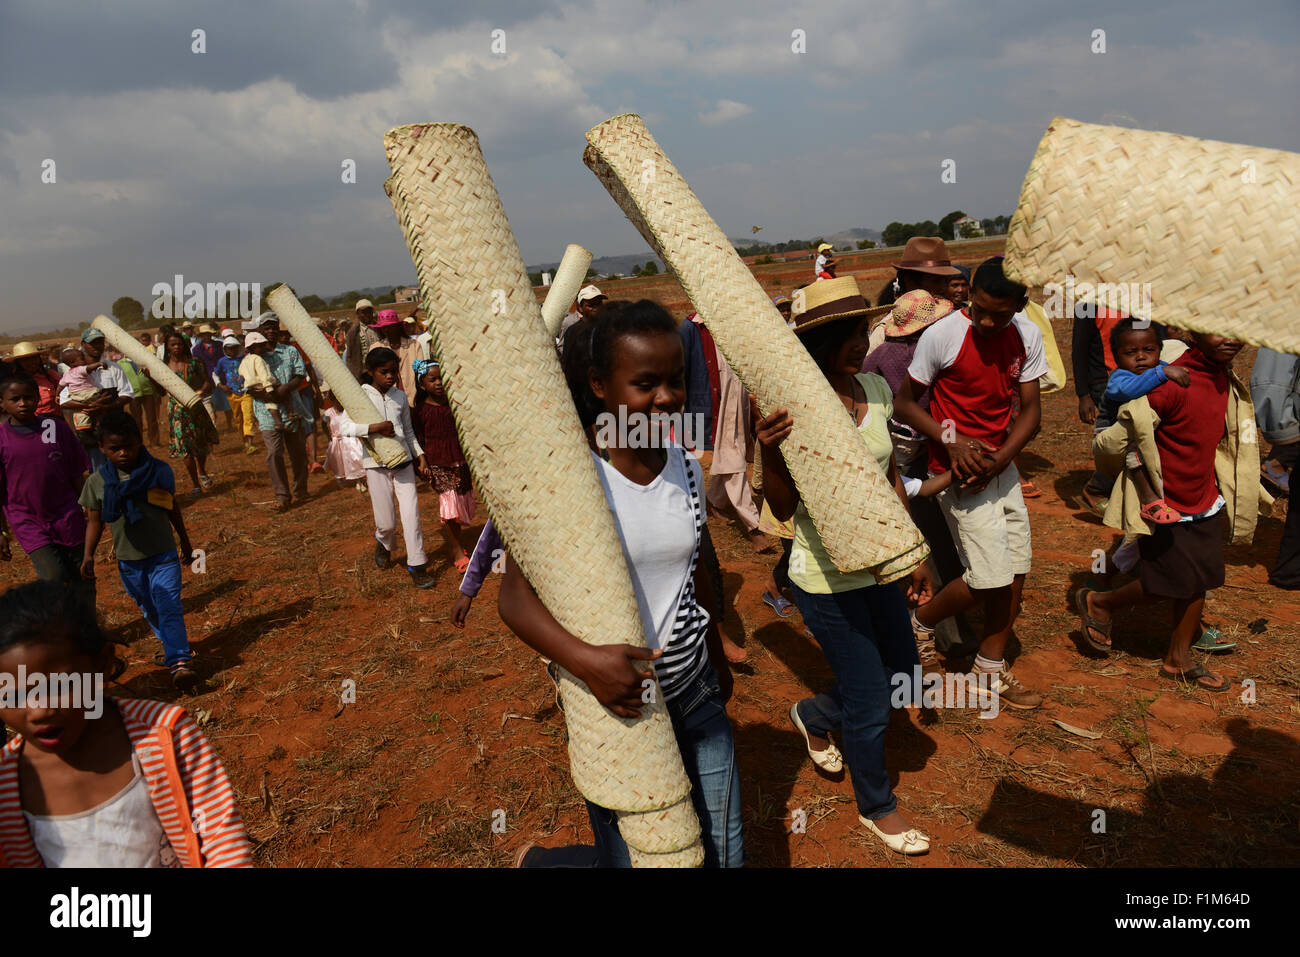 A procession to the tomb. Malagasy people holding mats which will cover the corpses when they are taken out. Stock Photo